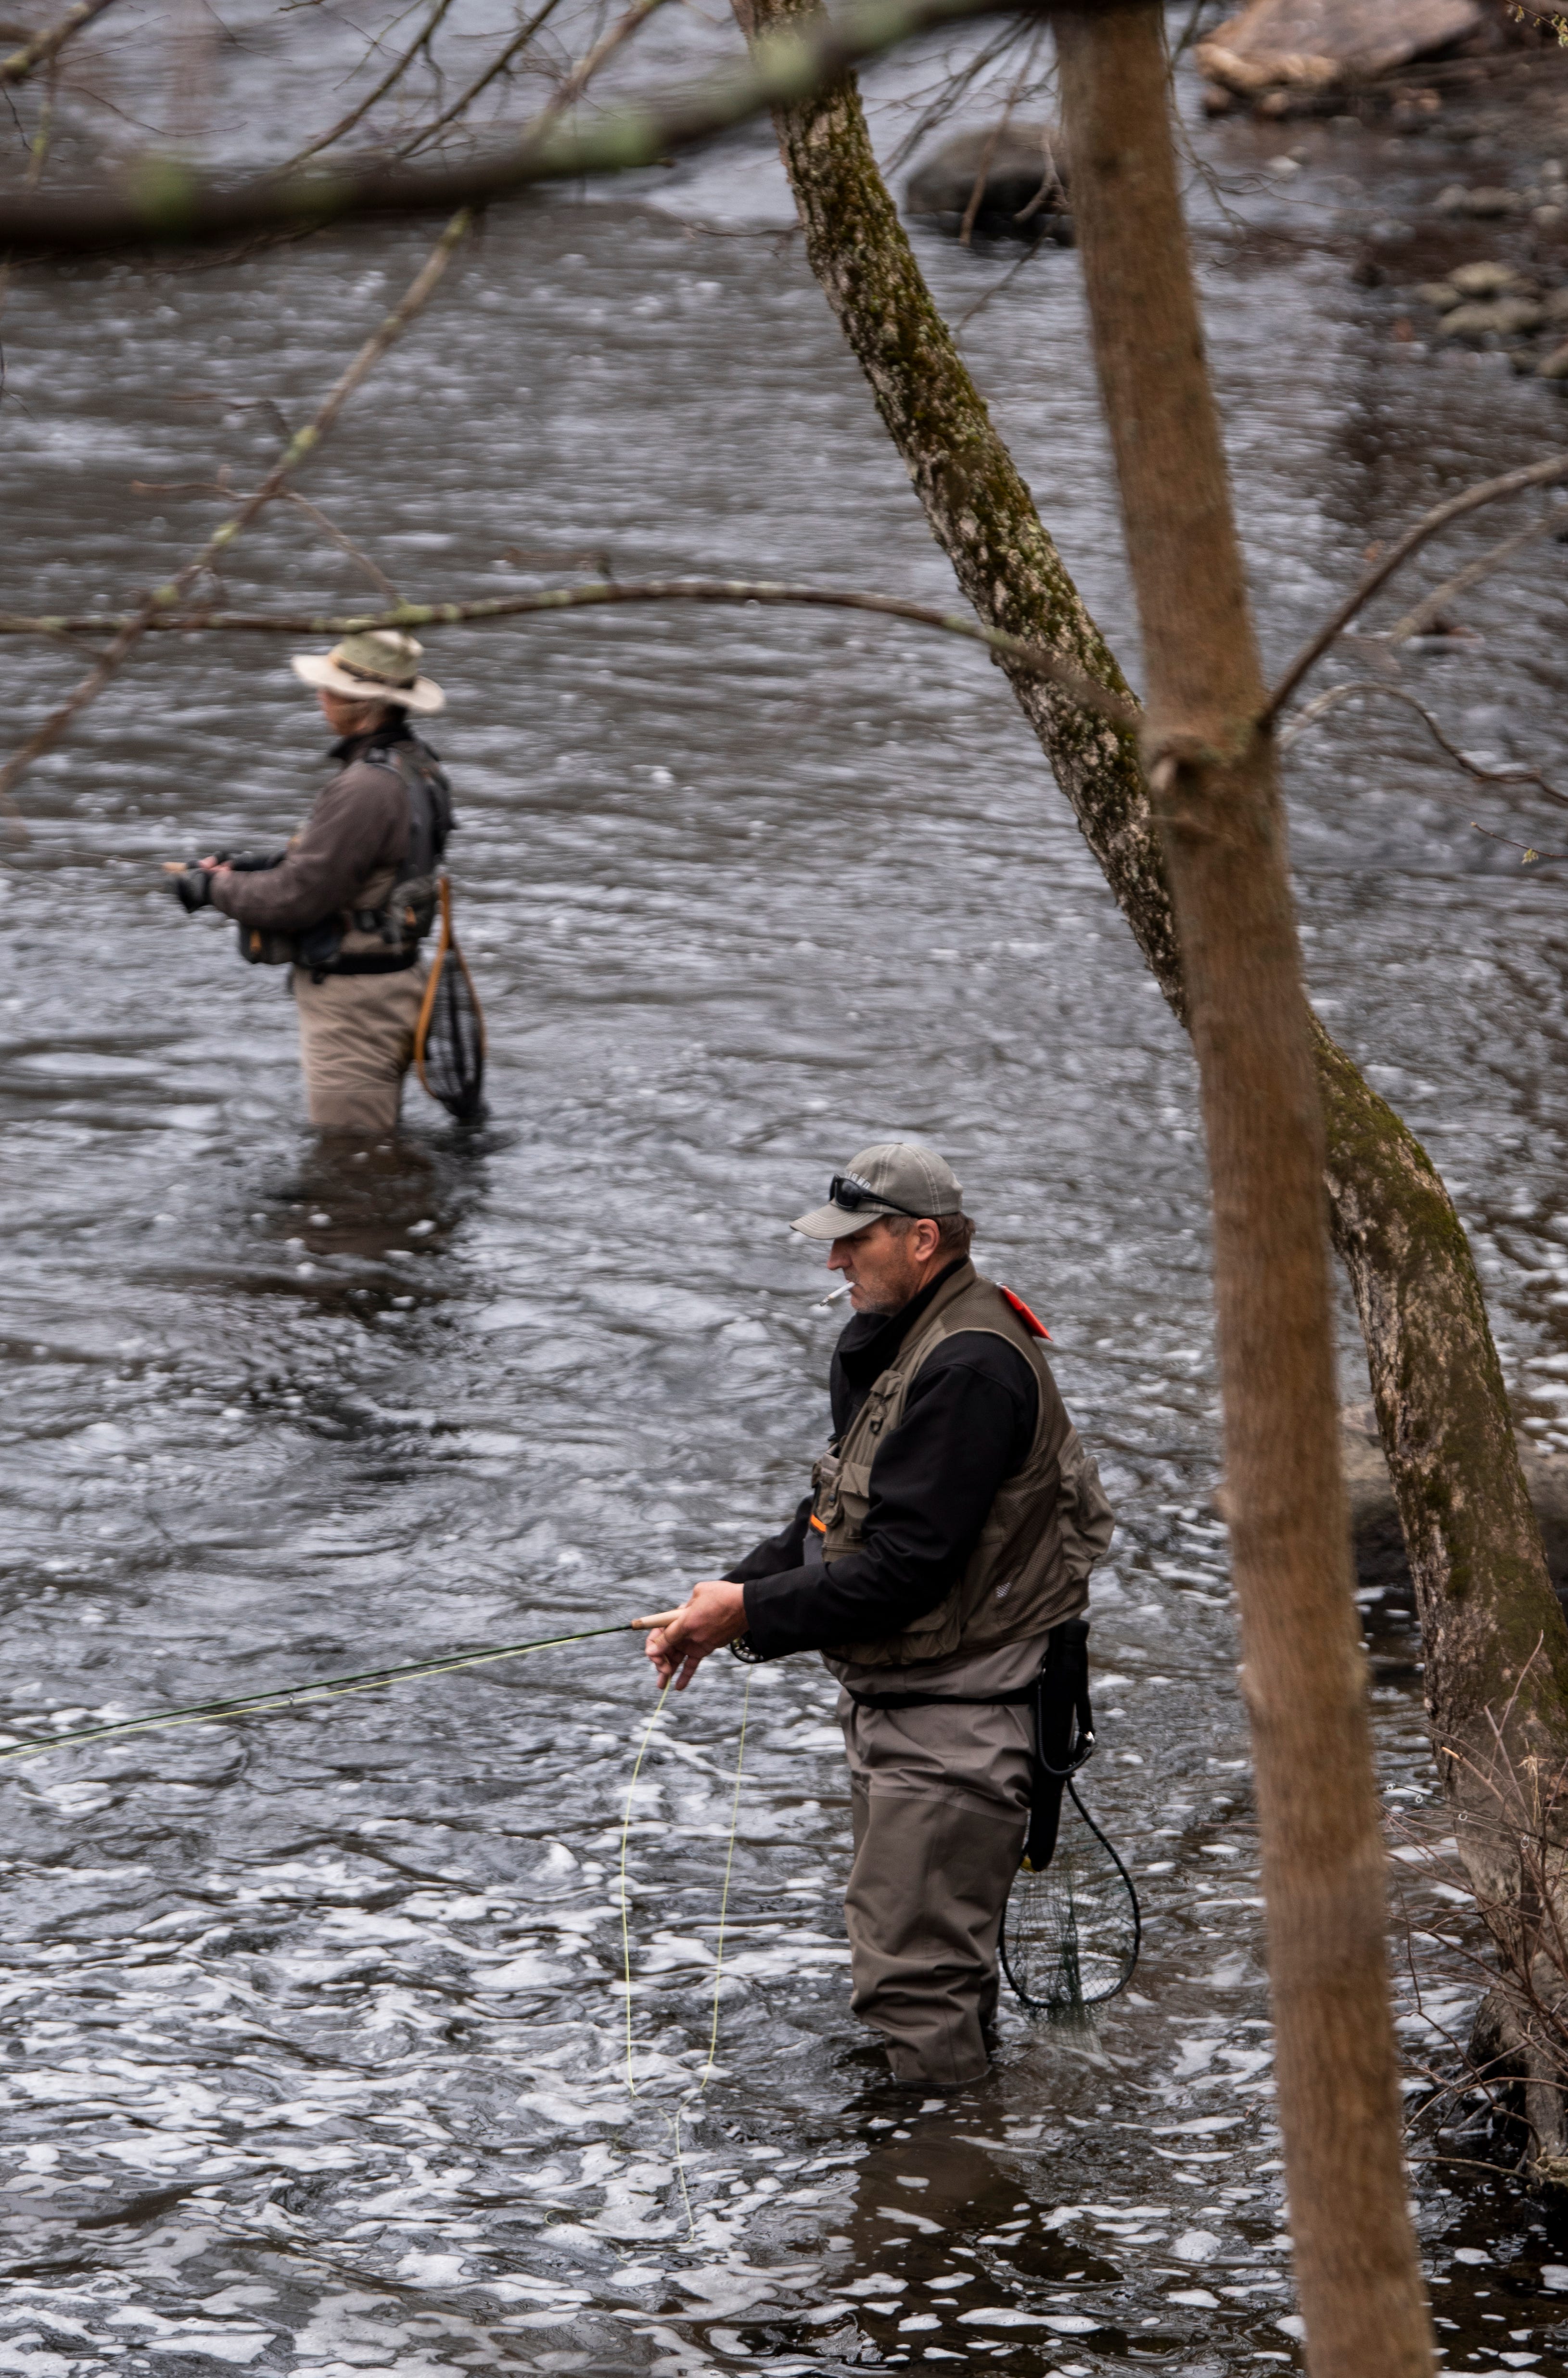 NJ trout season opens April 9. Here are great local fishing spots